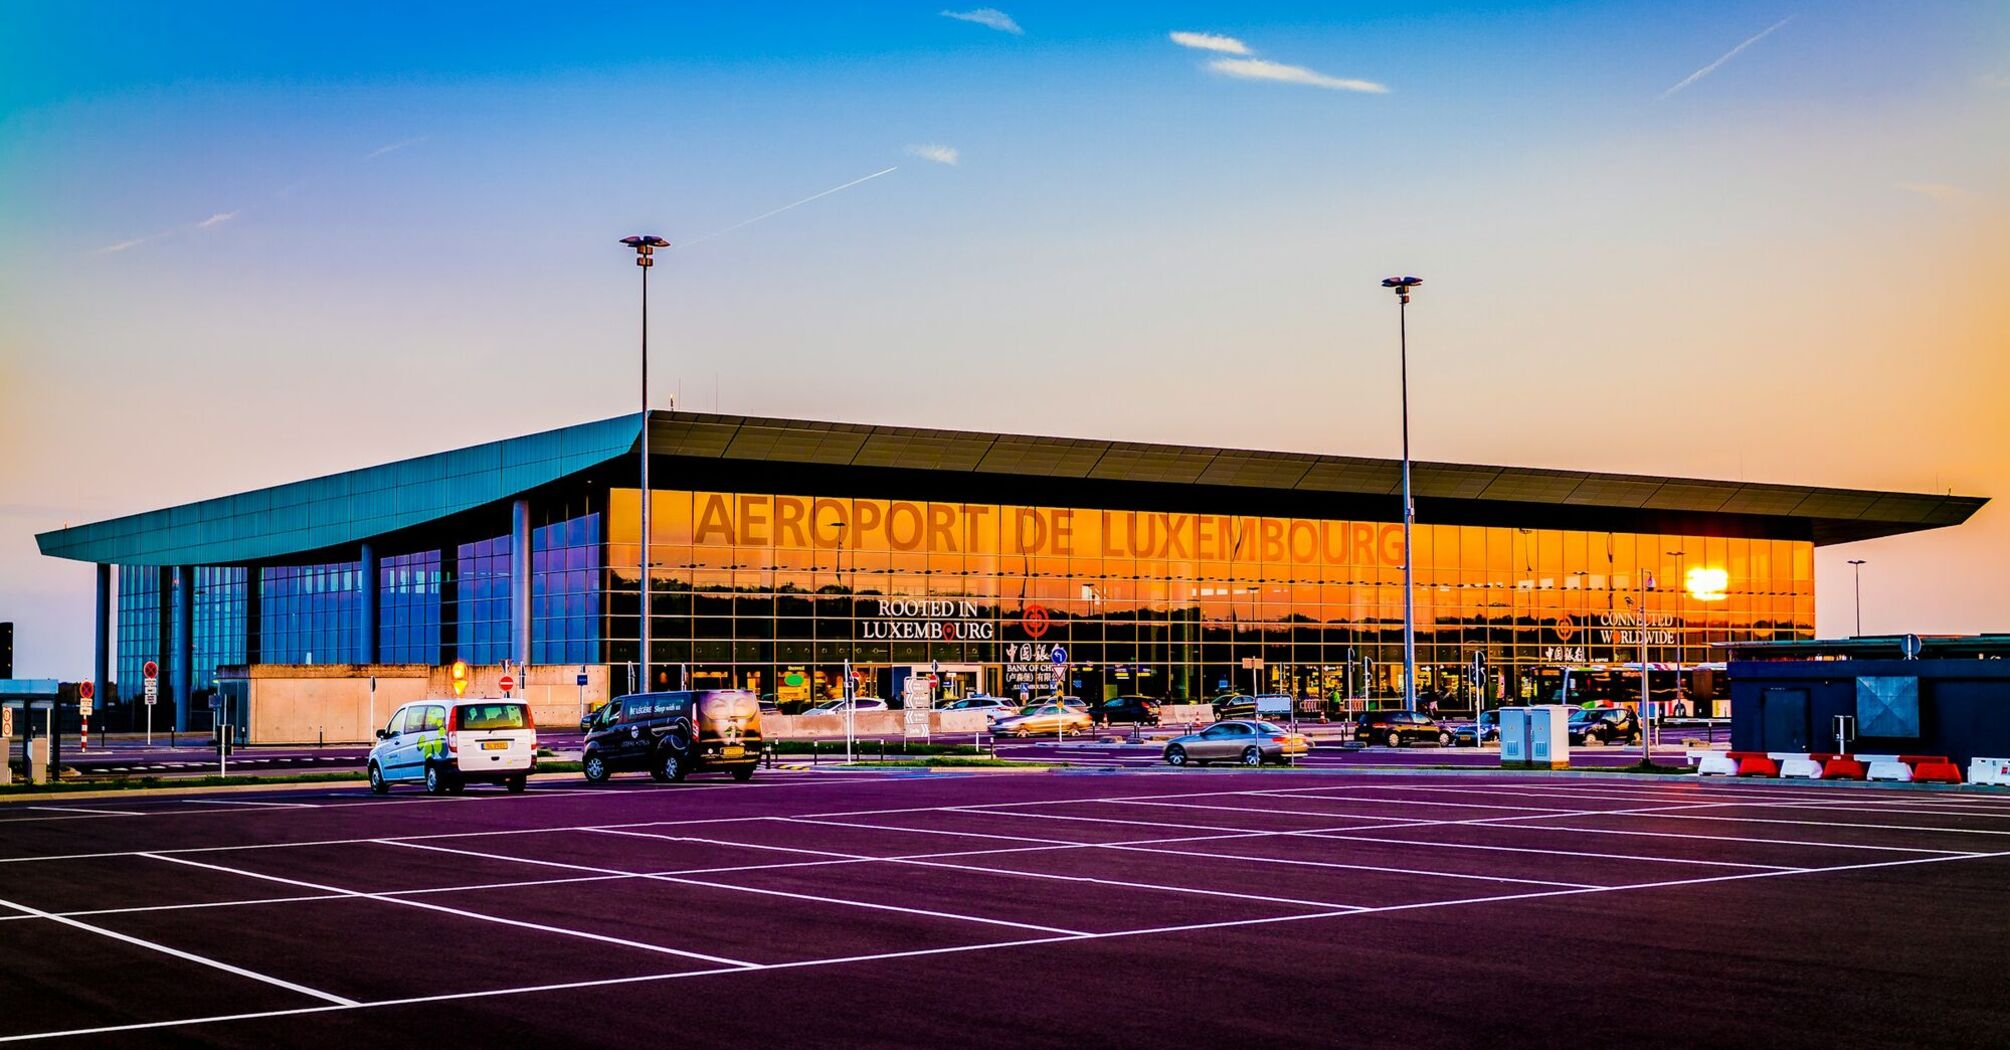 Sunset view of Luxembourg Airport with clear skies and parking